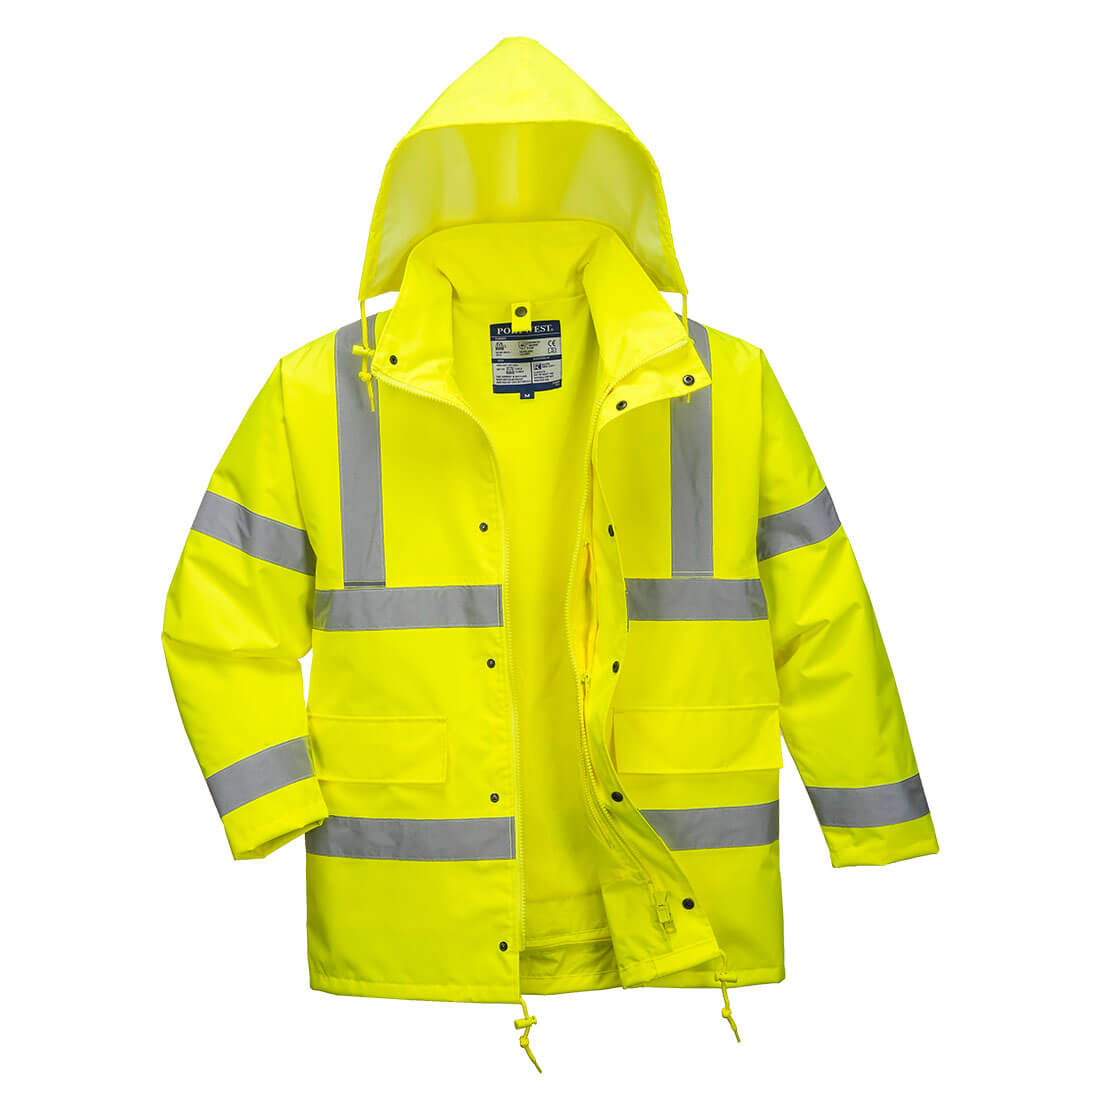 Image of Oxford Weave 300D Class 3 Hi Vis 4-in1 Traffic Jacket Yellow S